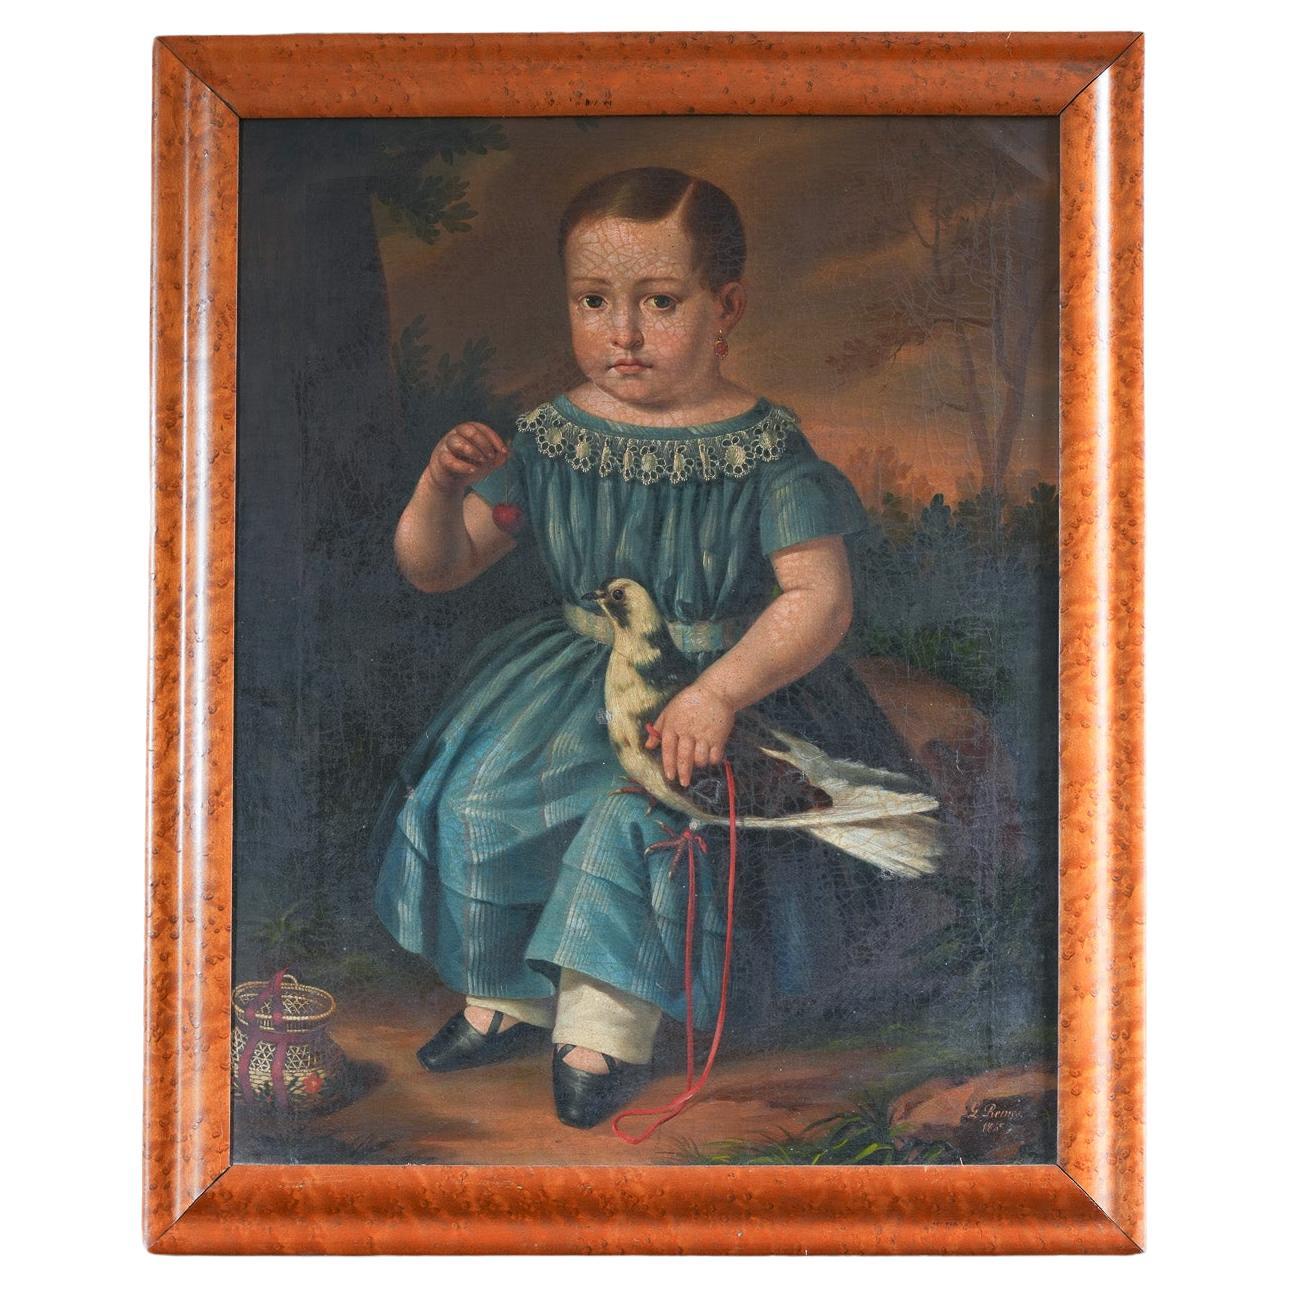 A 19th Century Portrait of a Boy With Pet Pigeon